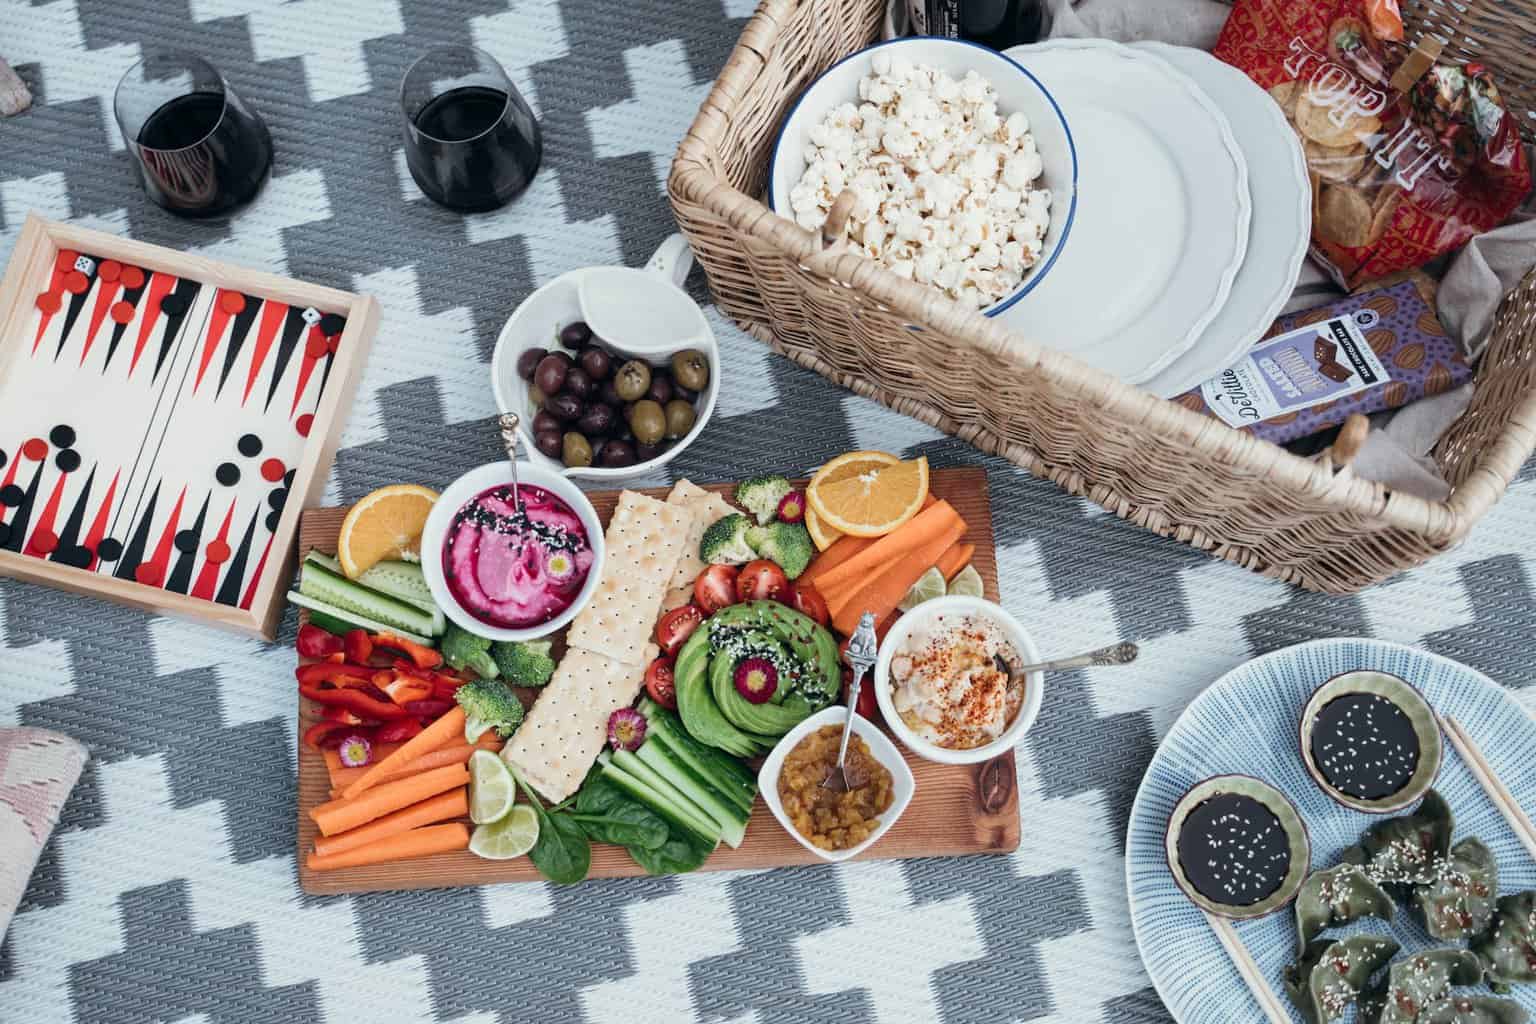 These Healthy and Tasty Foods Will Take Your Picnic to the Next Level